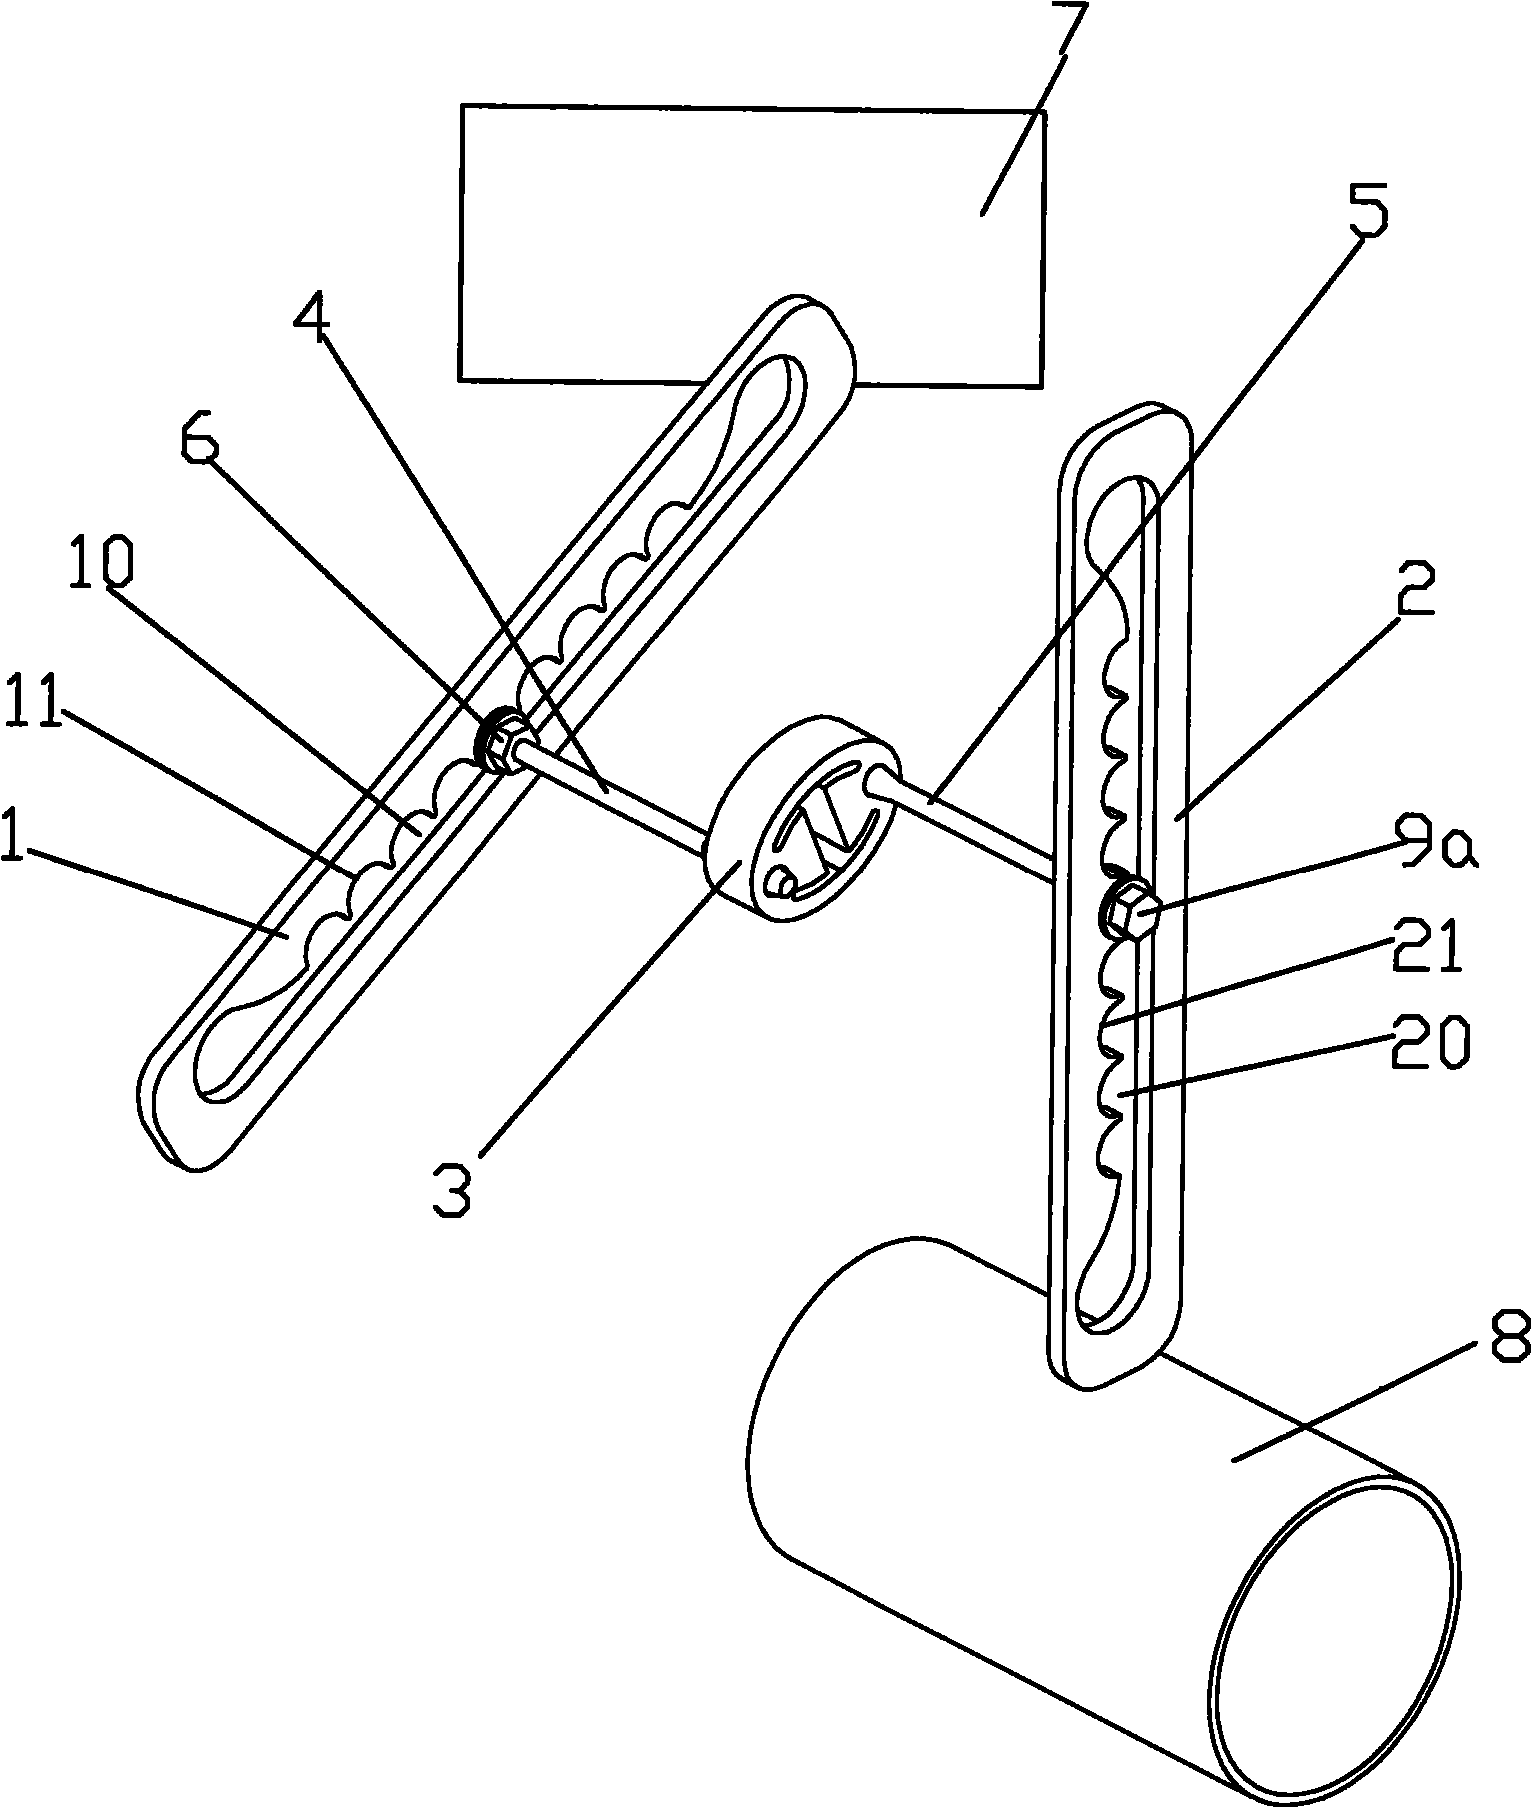 Suspension device of automotive exhaust system capable of adjusting angle of lifting lug